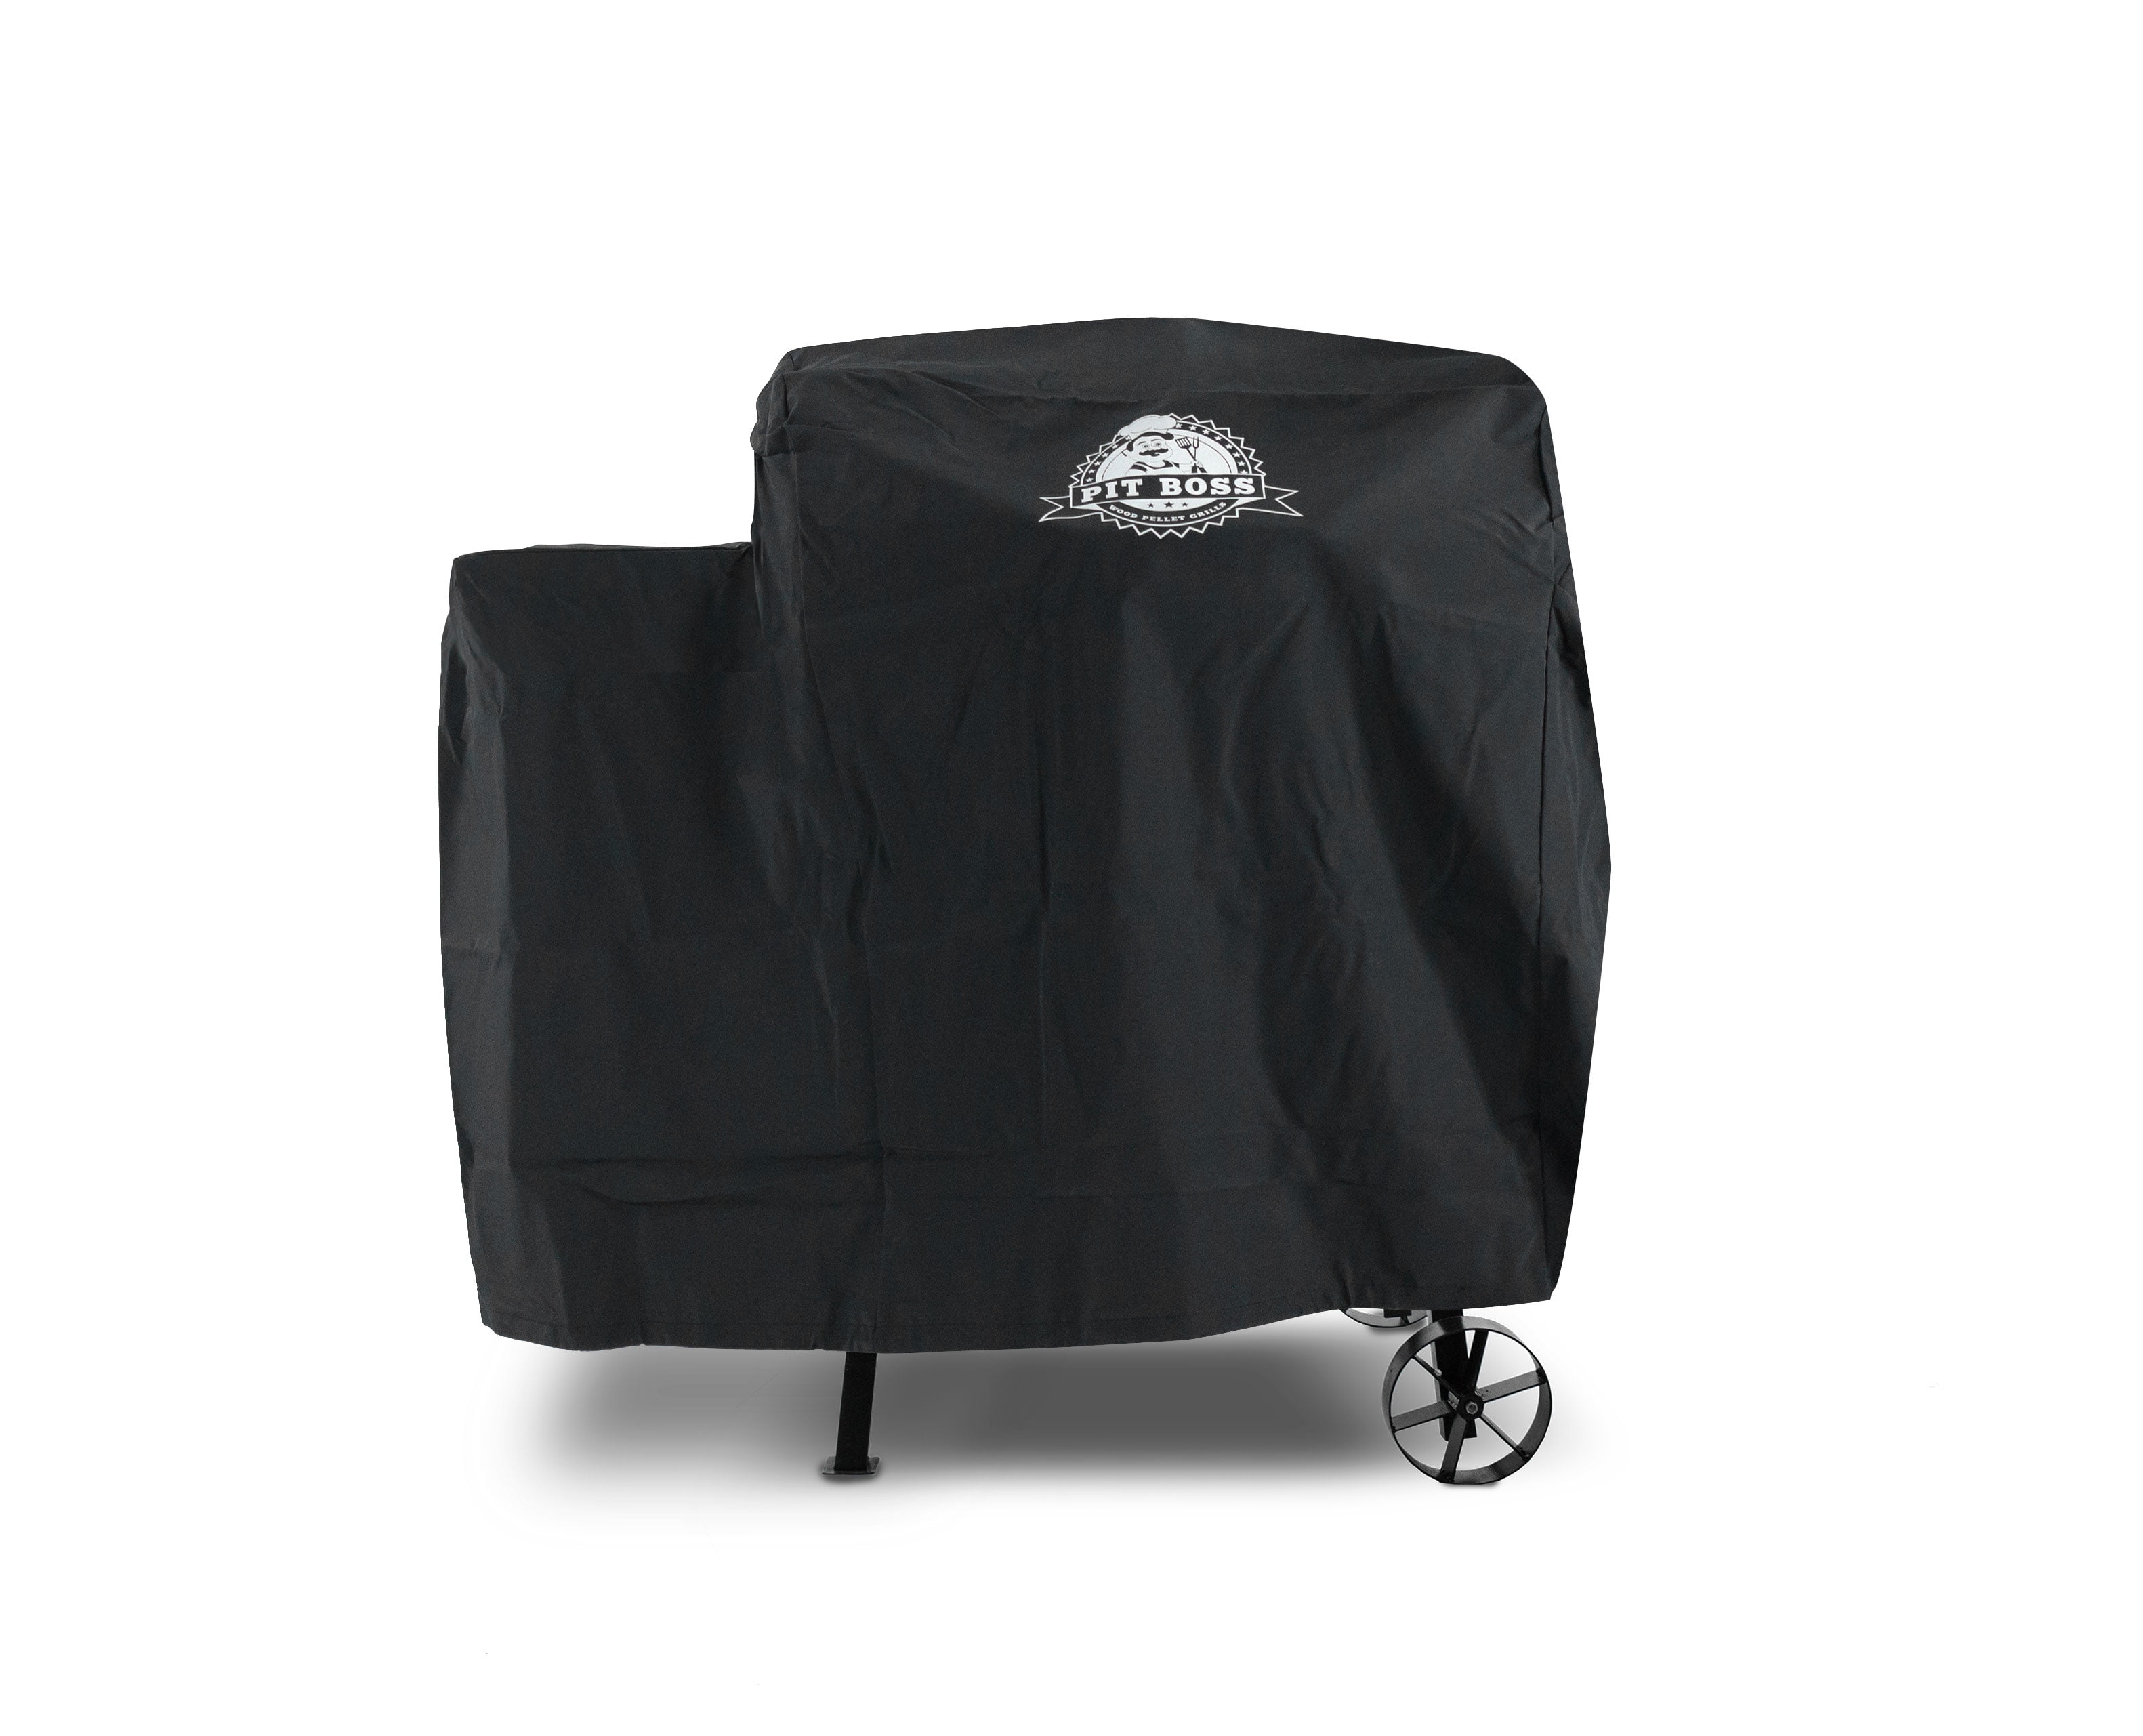 pit boss 1000 grill cover